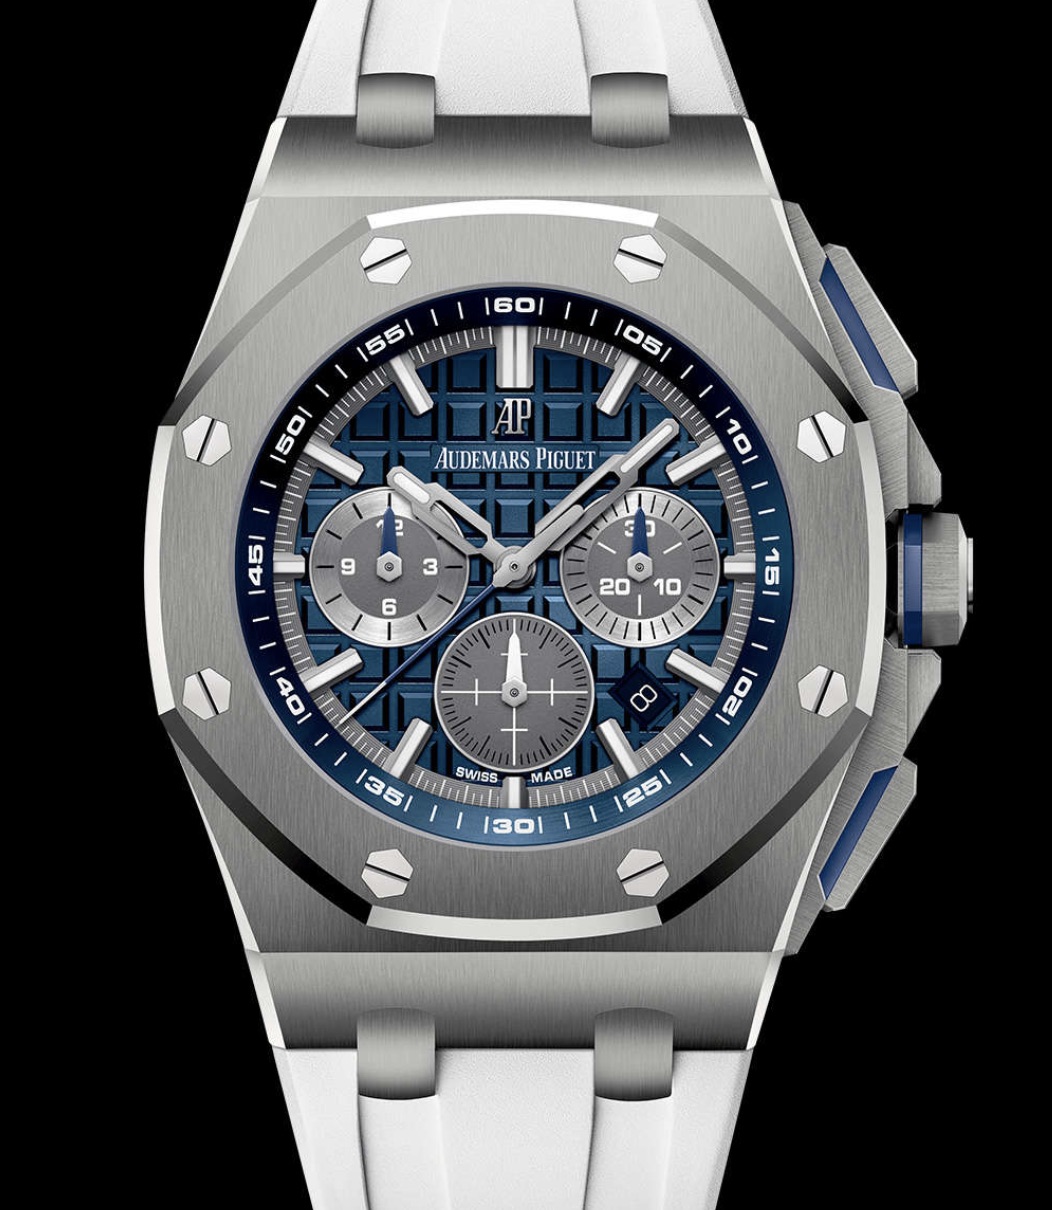 Updated Audemars Piguet Royal Oak Offshore Replica Watch In Thinner Titanium Case And New Dial